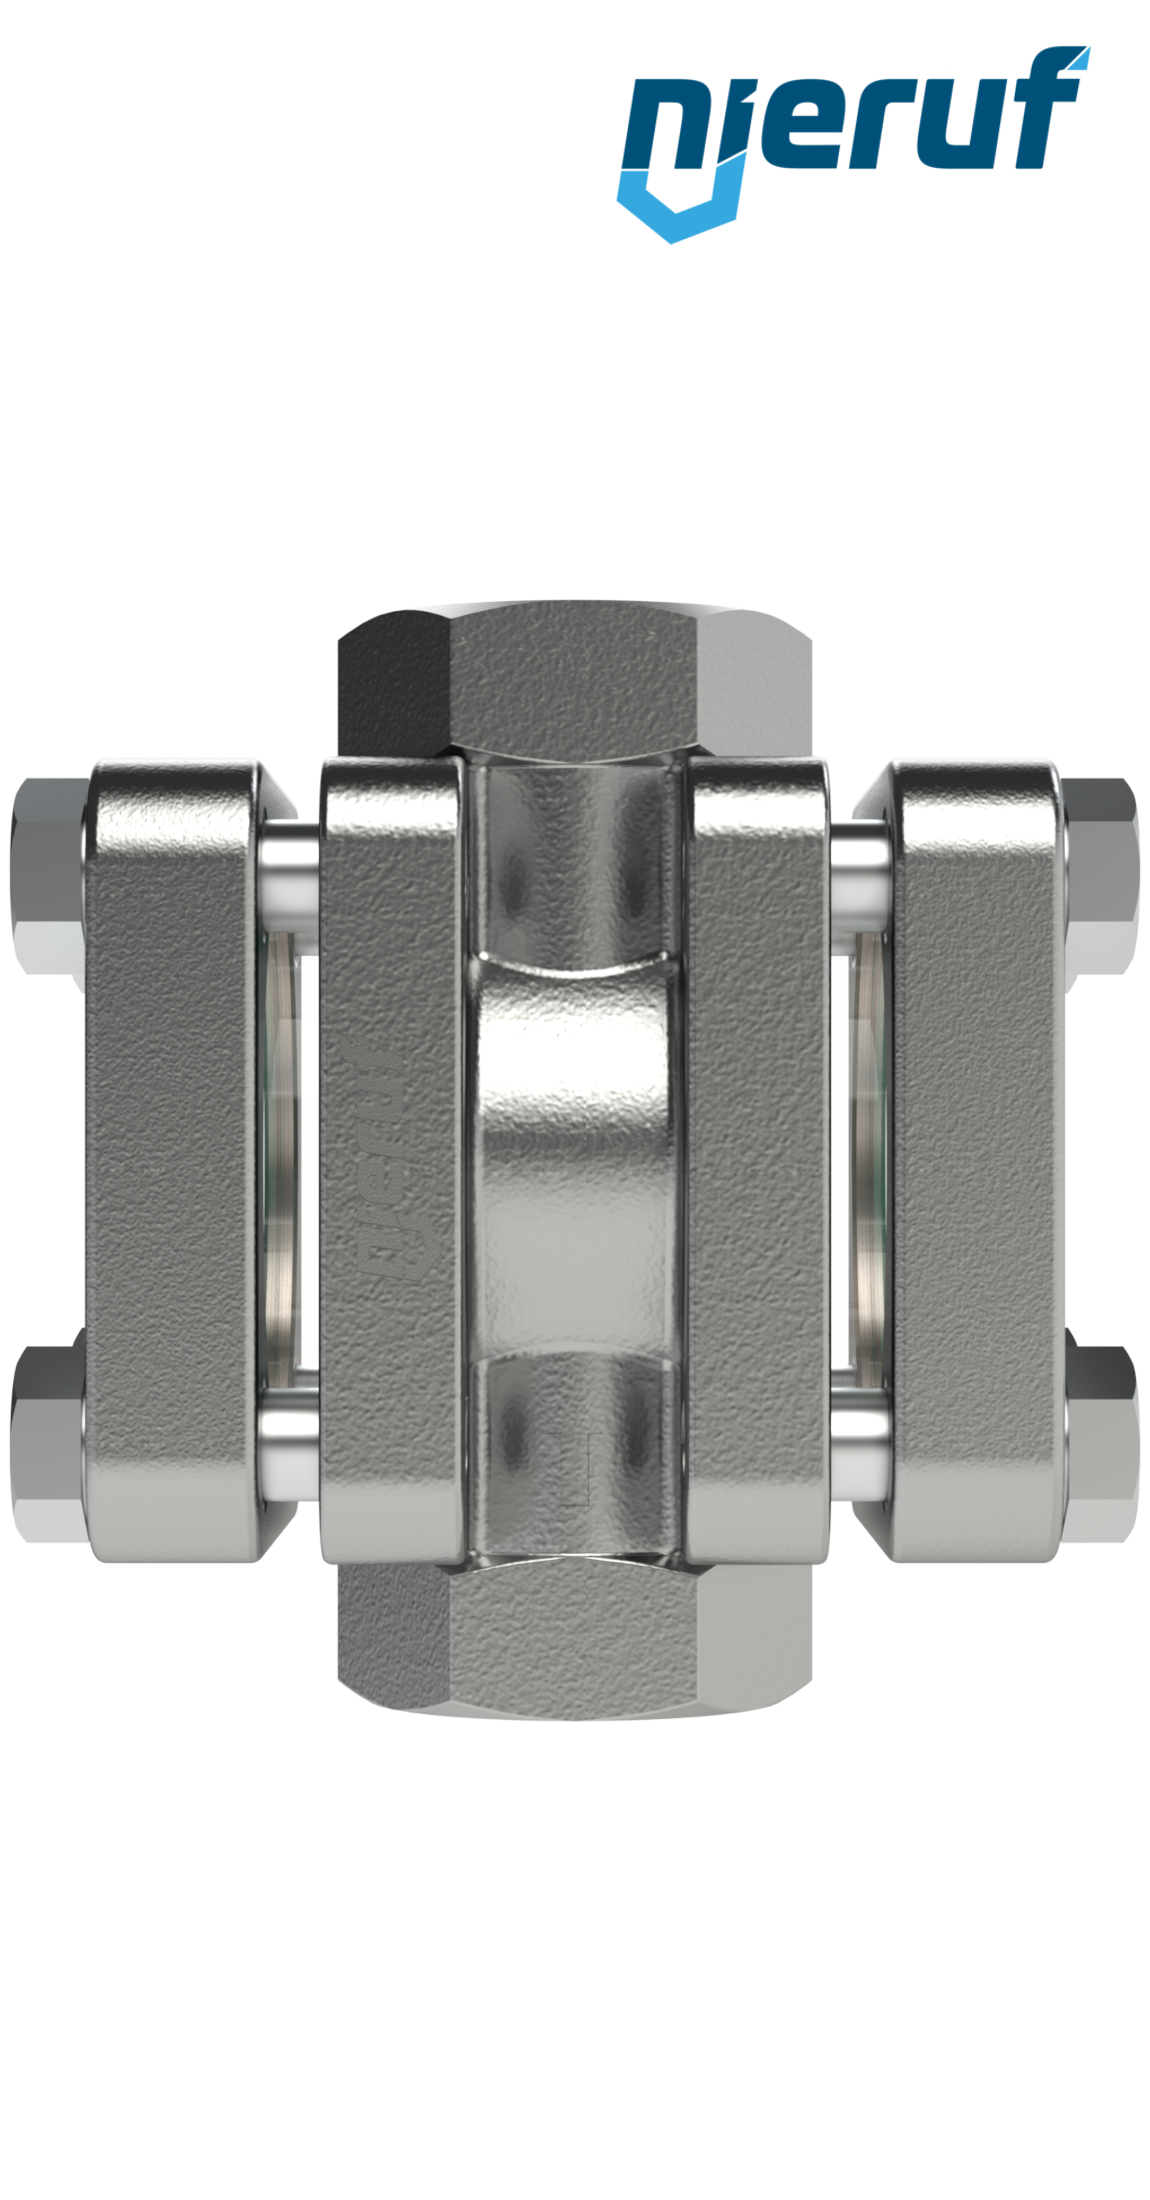 flow-through sight flow indicator DN20 - 3/4" Inch stainless steel soda lime glass design with disc